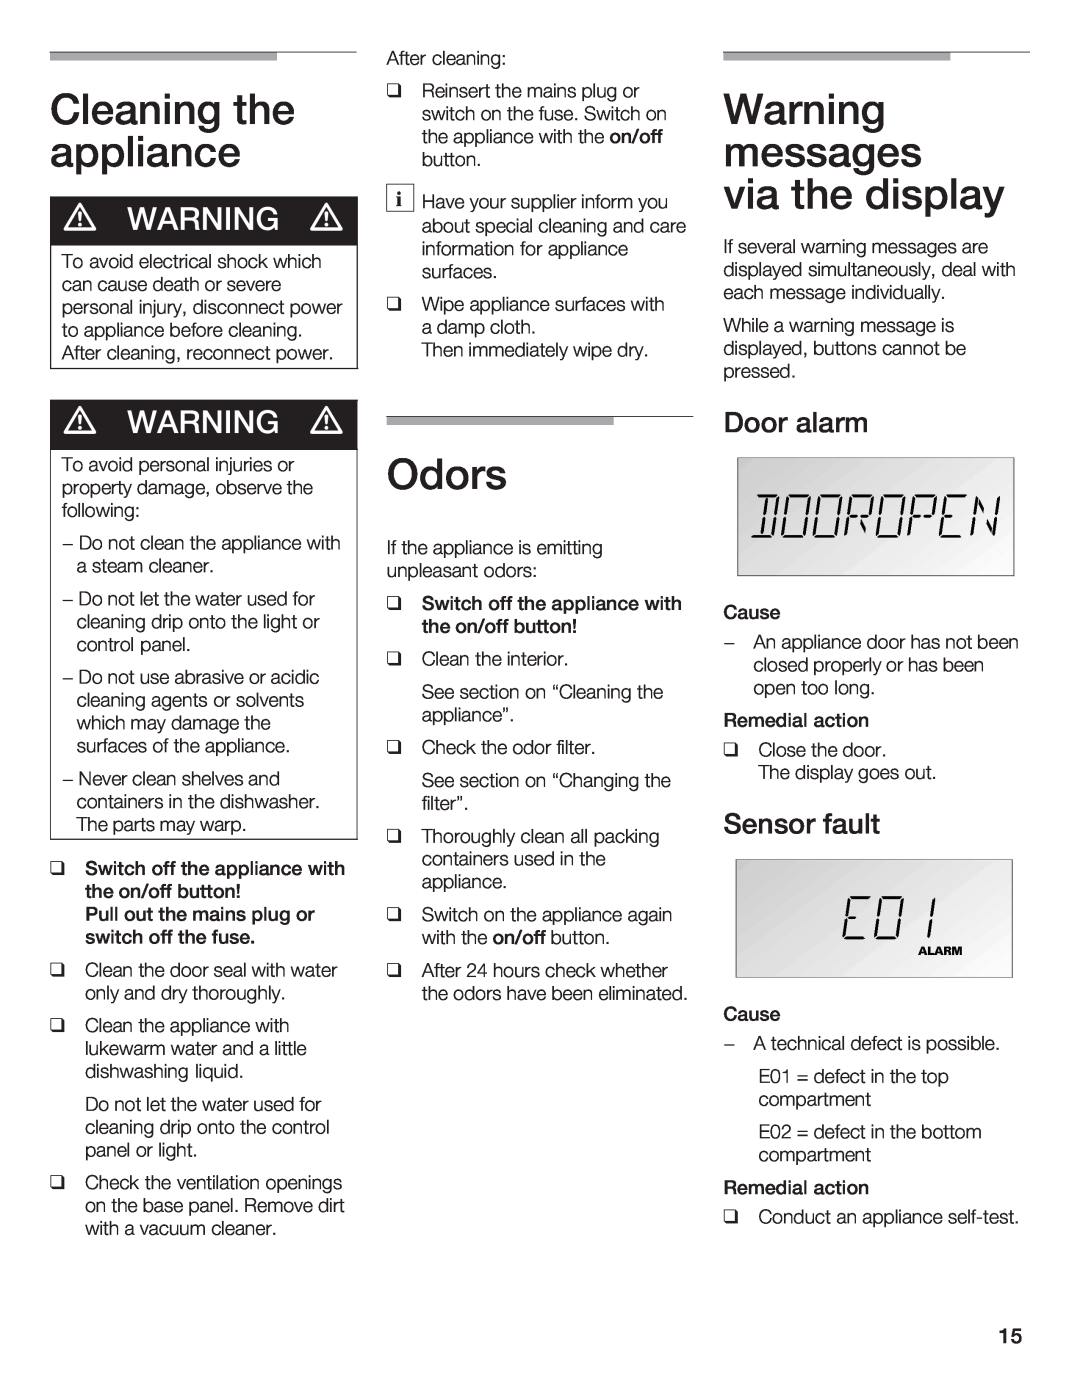 Bosch Appliances B24IW, B18IW Cleaning the appliance, Warning messages via the display, Odors, d WARNING d, Door alarm 